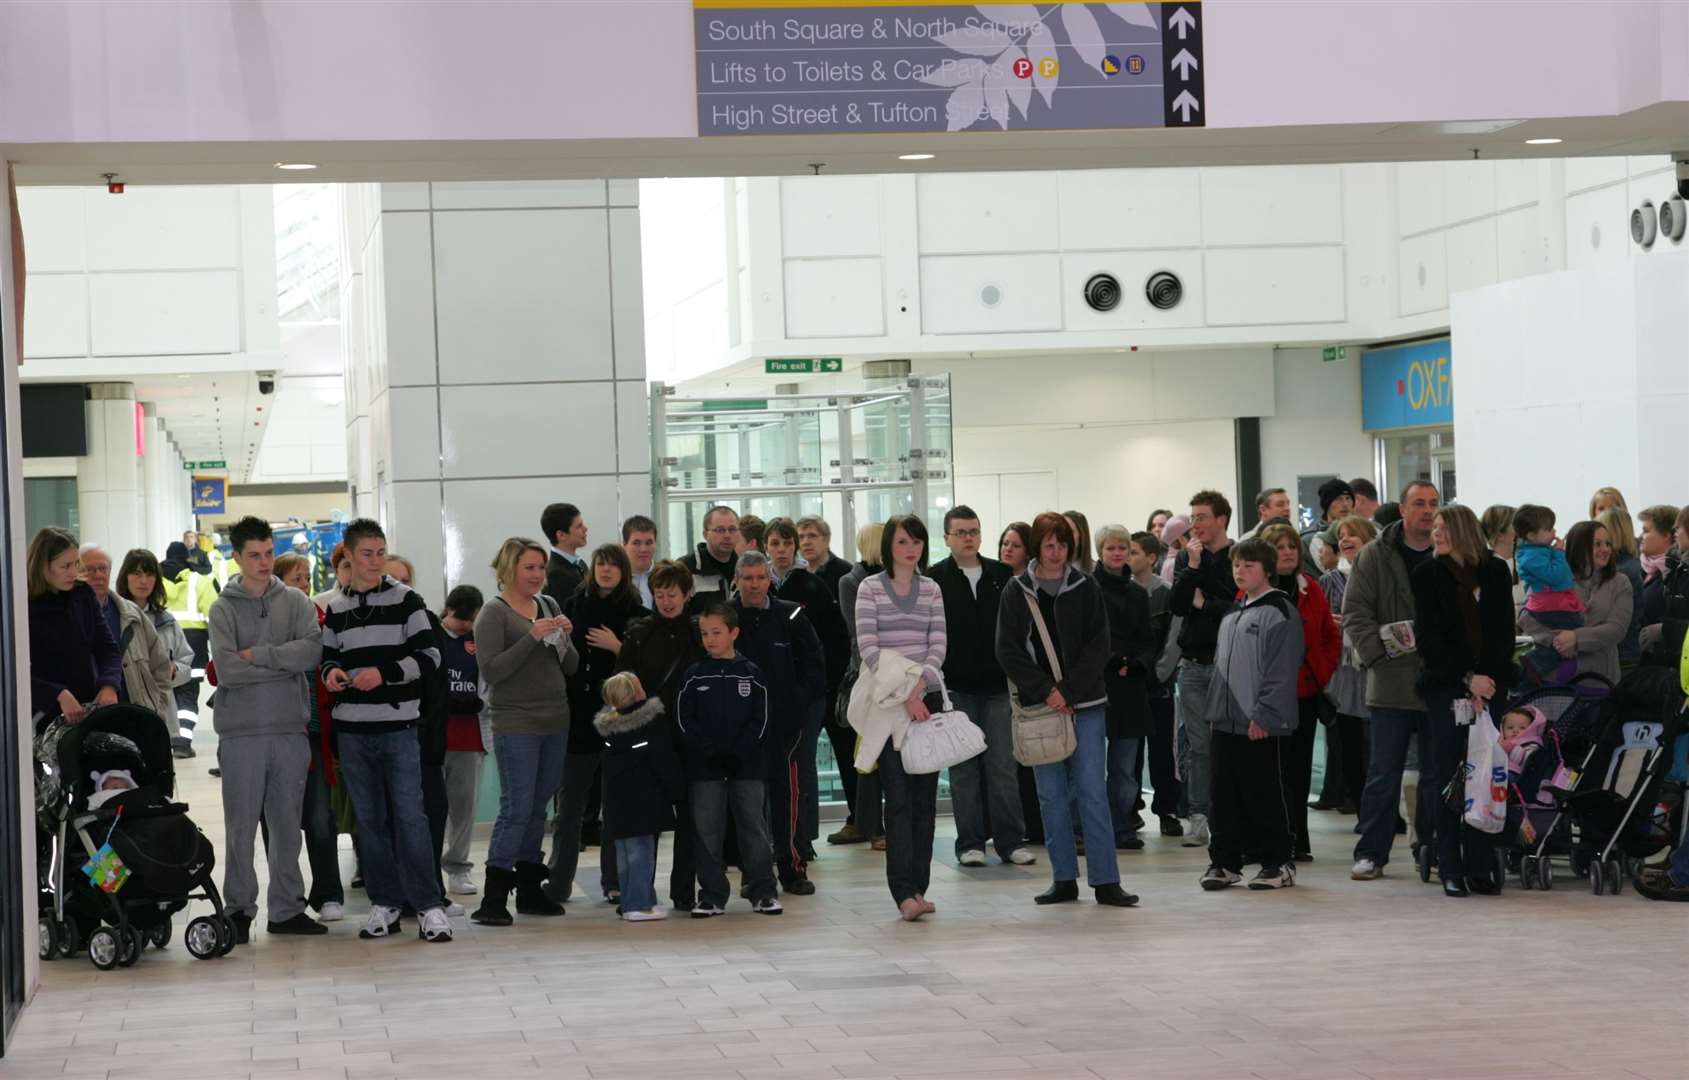 Shoppers who arrived at 9am for the opening of the extension in 2008 were left waiting as the fire safety officer was yet to sign off the paperwork